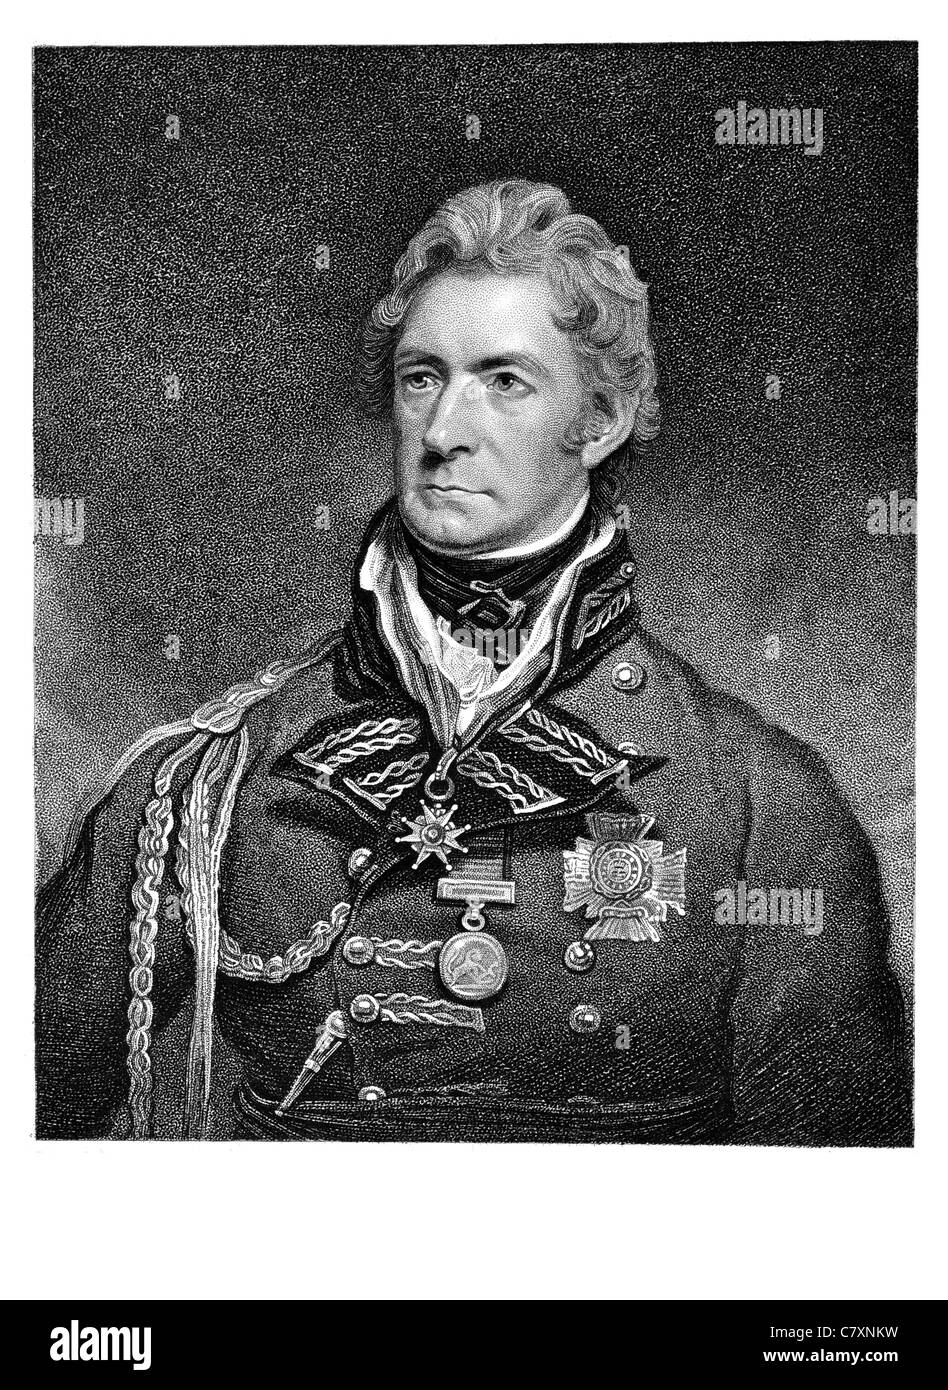 Major general Sir Thomas Munro 1st Baronet 1761 1827 Scottish soldier colonial administrator East India Company Army officer Stock Photo